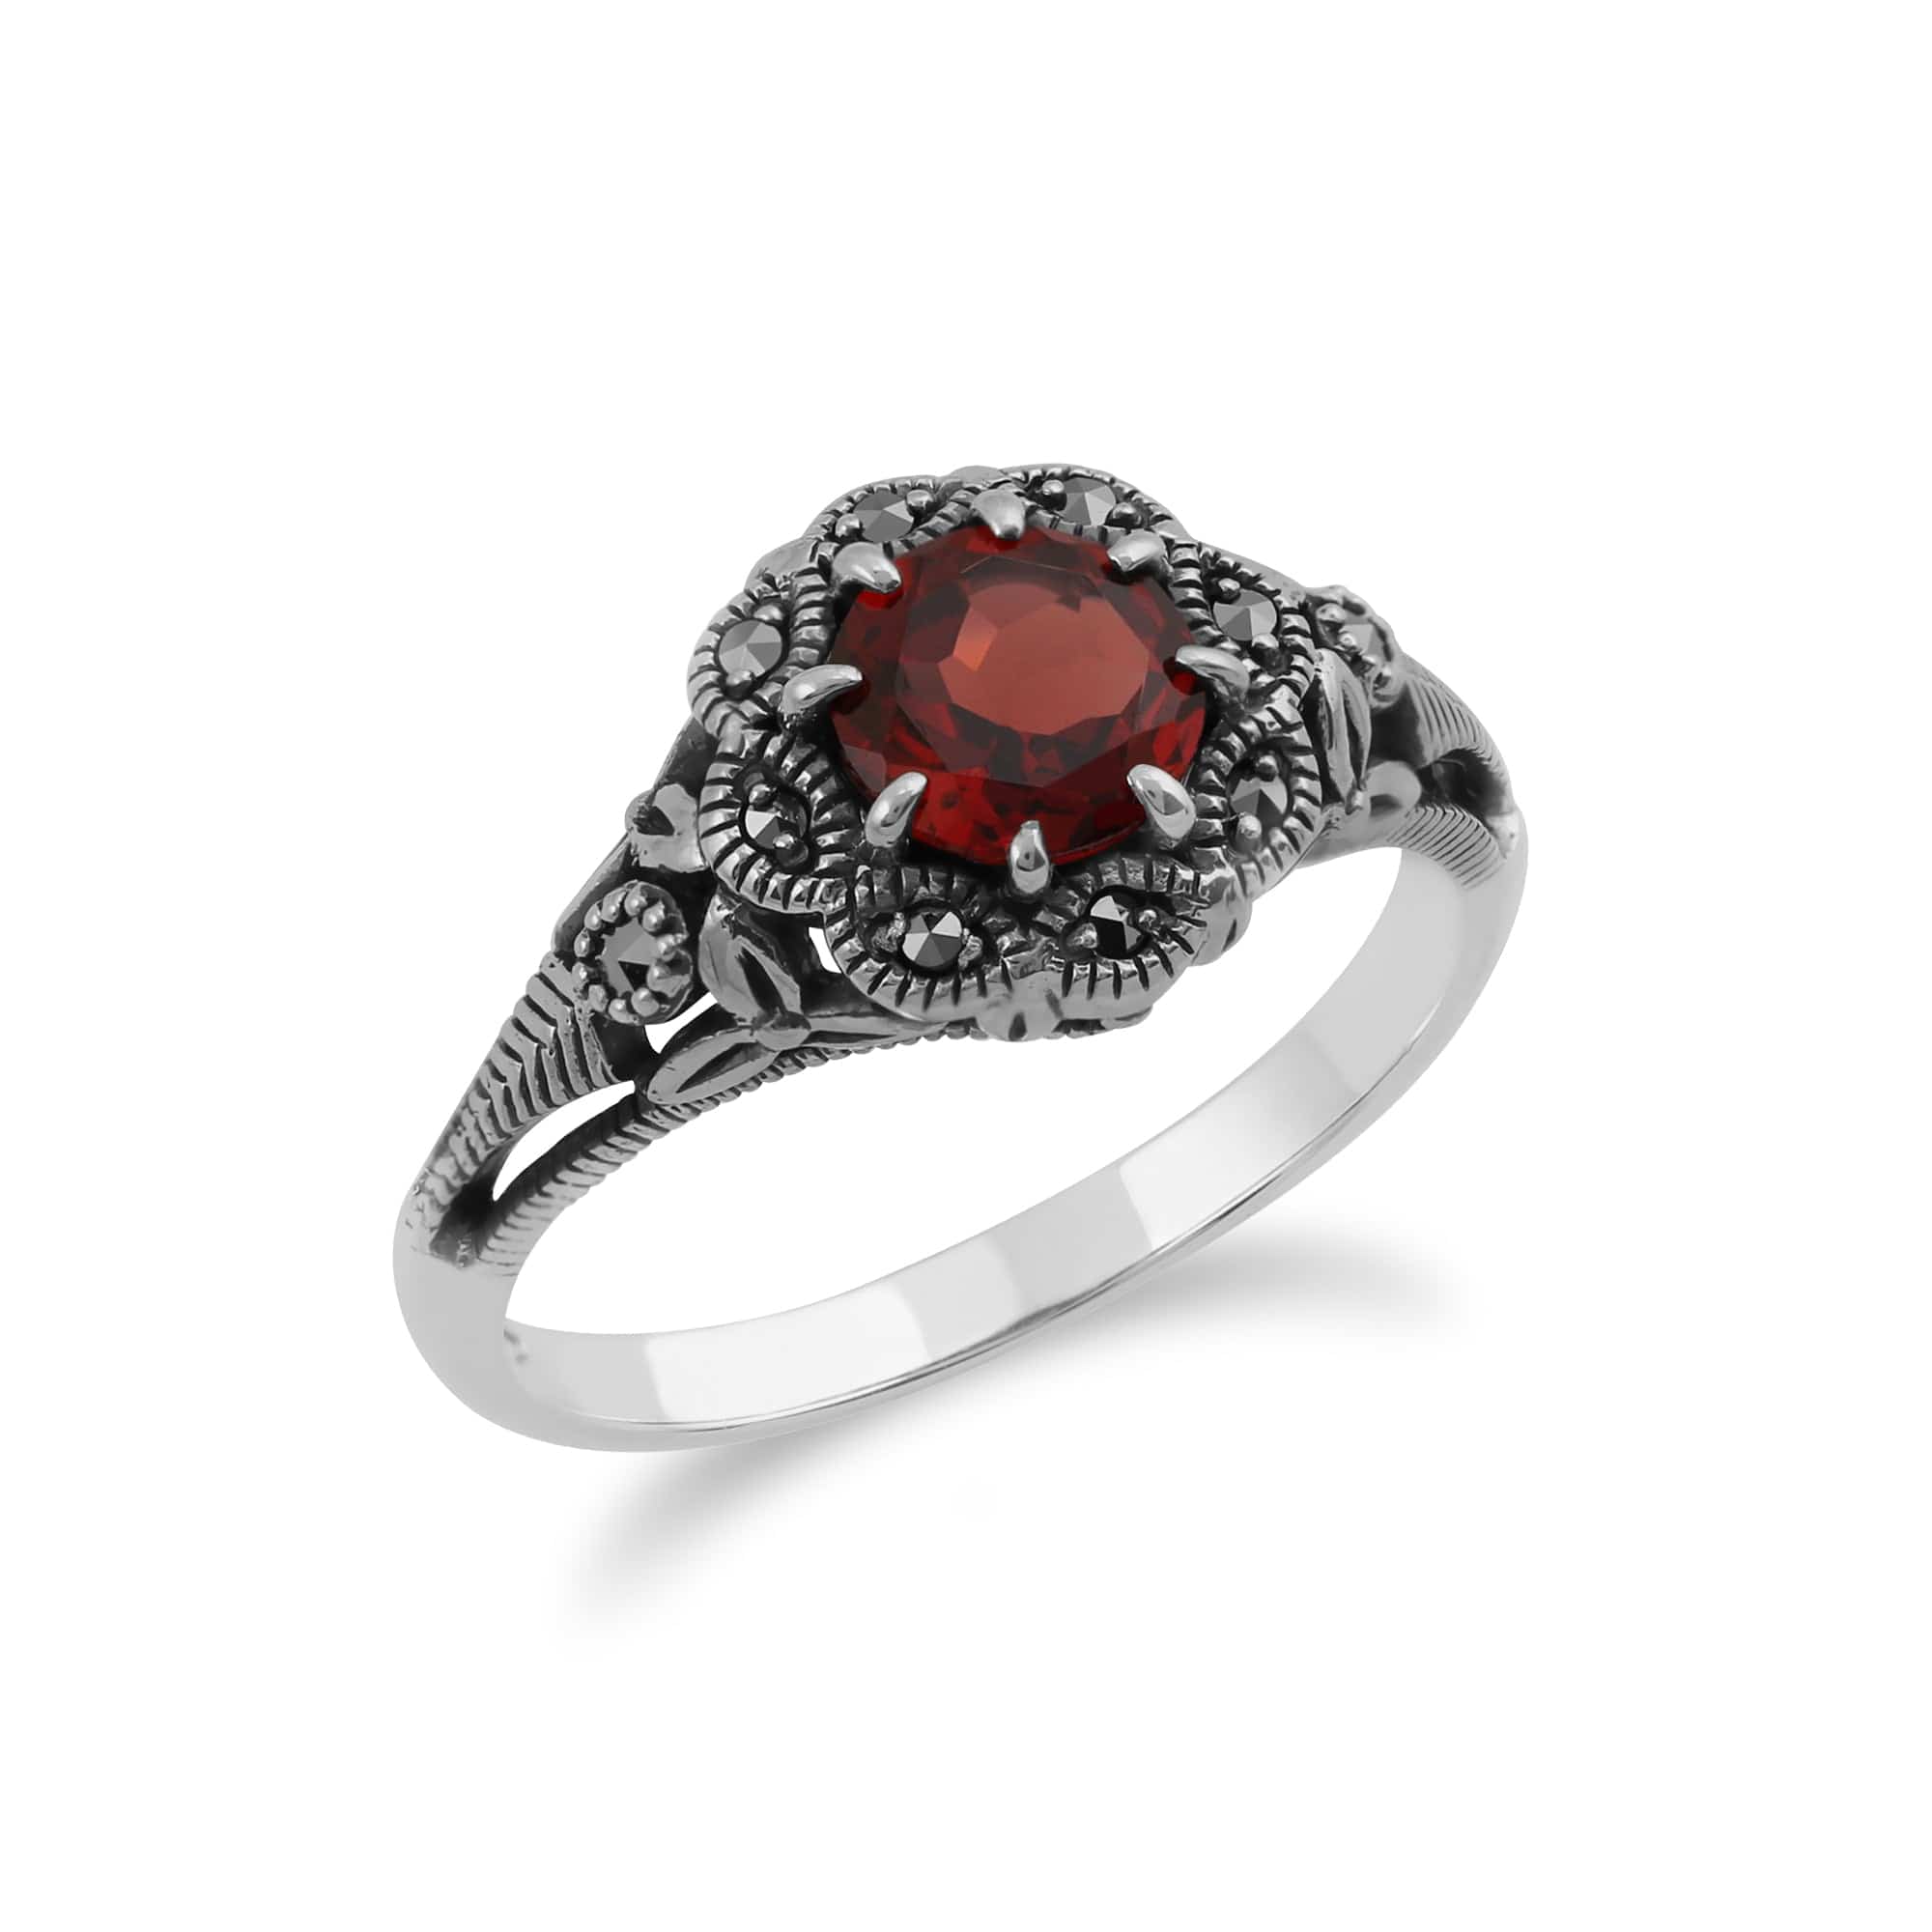 214R524705925 Art Nouveau Style Round Garnet & Marcasite Floral Ring in Sterling Silver 2